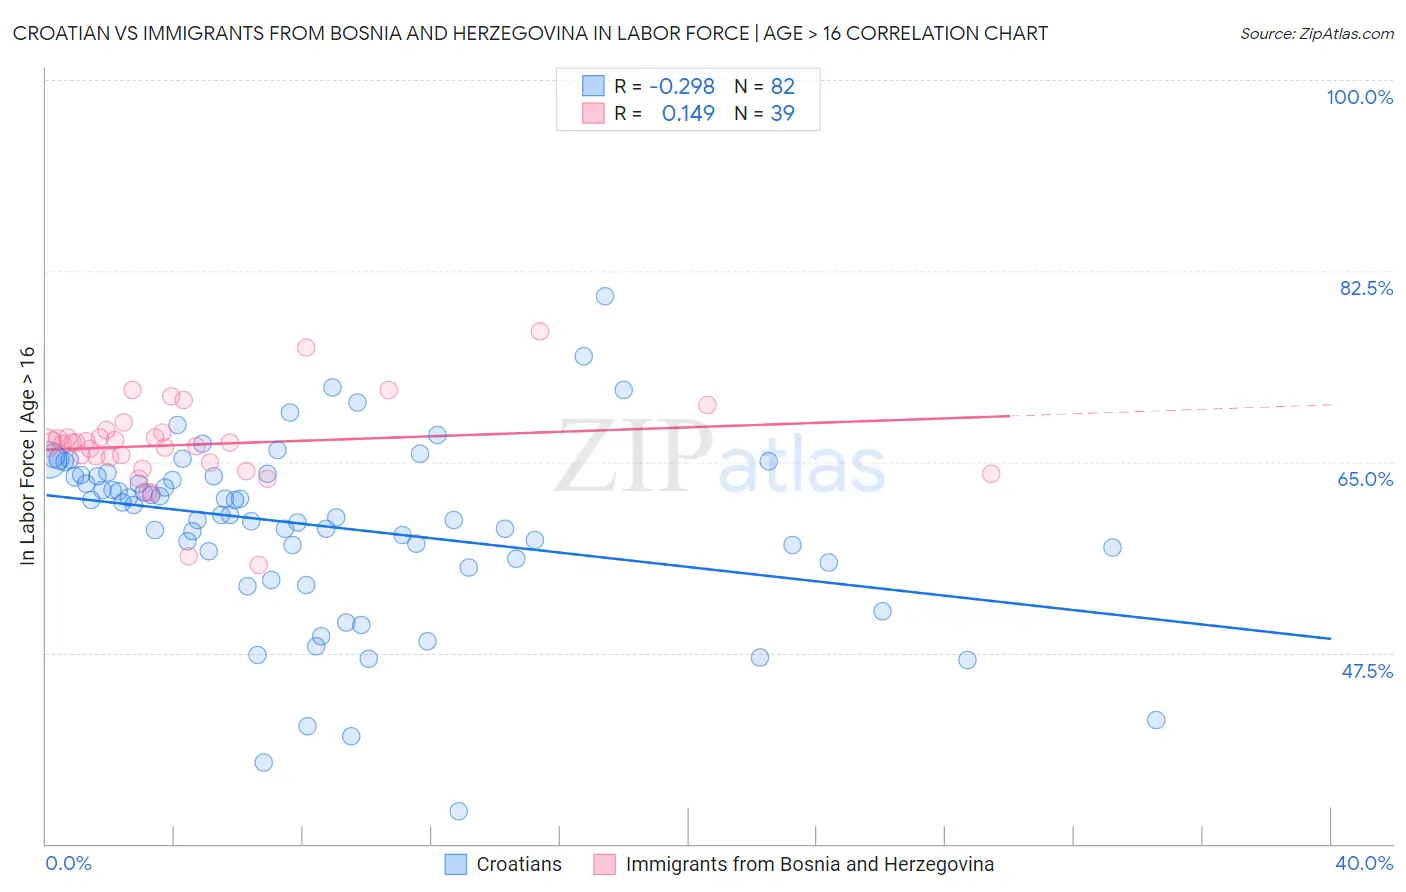 Croatian vs Immigrants from Bosnia and Herzegovina In Labor Force | Age > 16